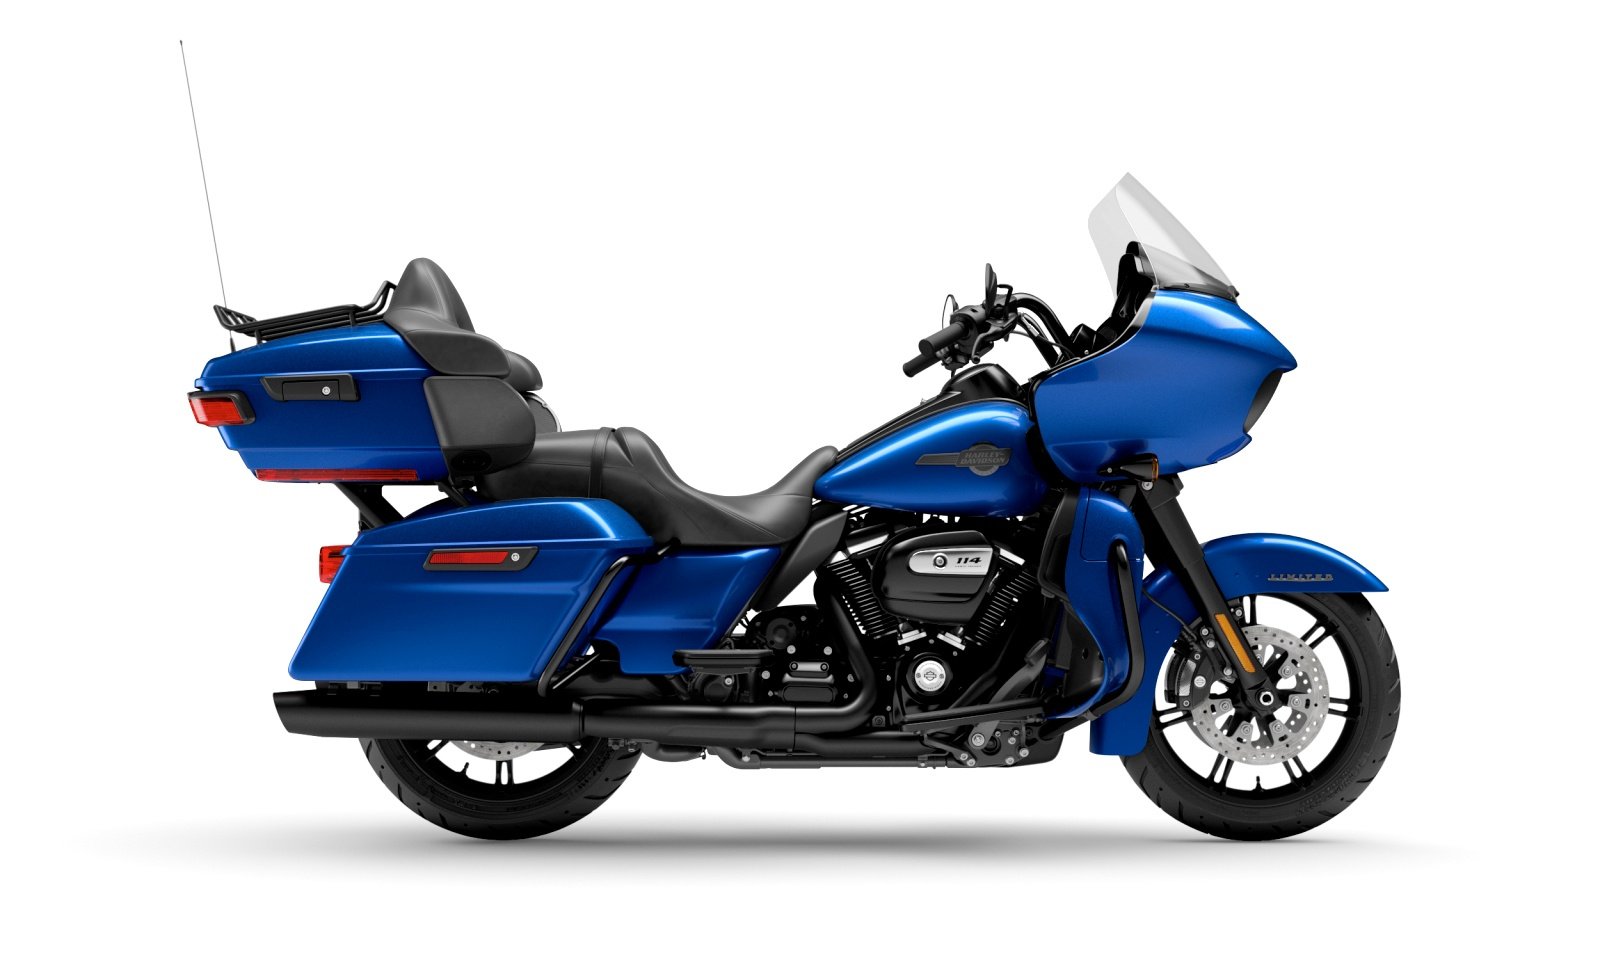 Harley-Davidson Street Glide Special : Price, Images, Specs & Reviews 